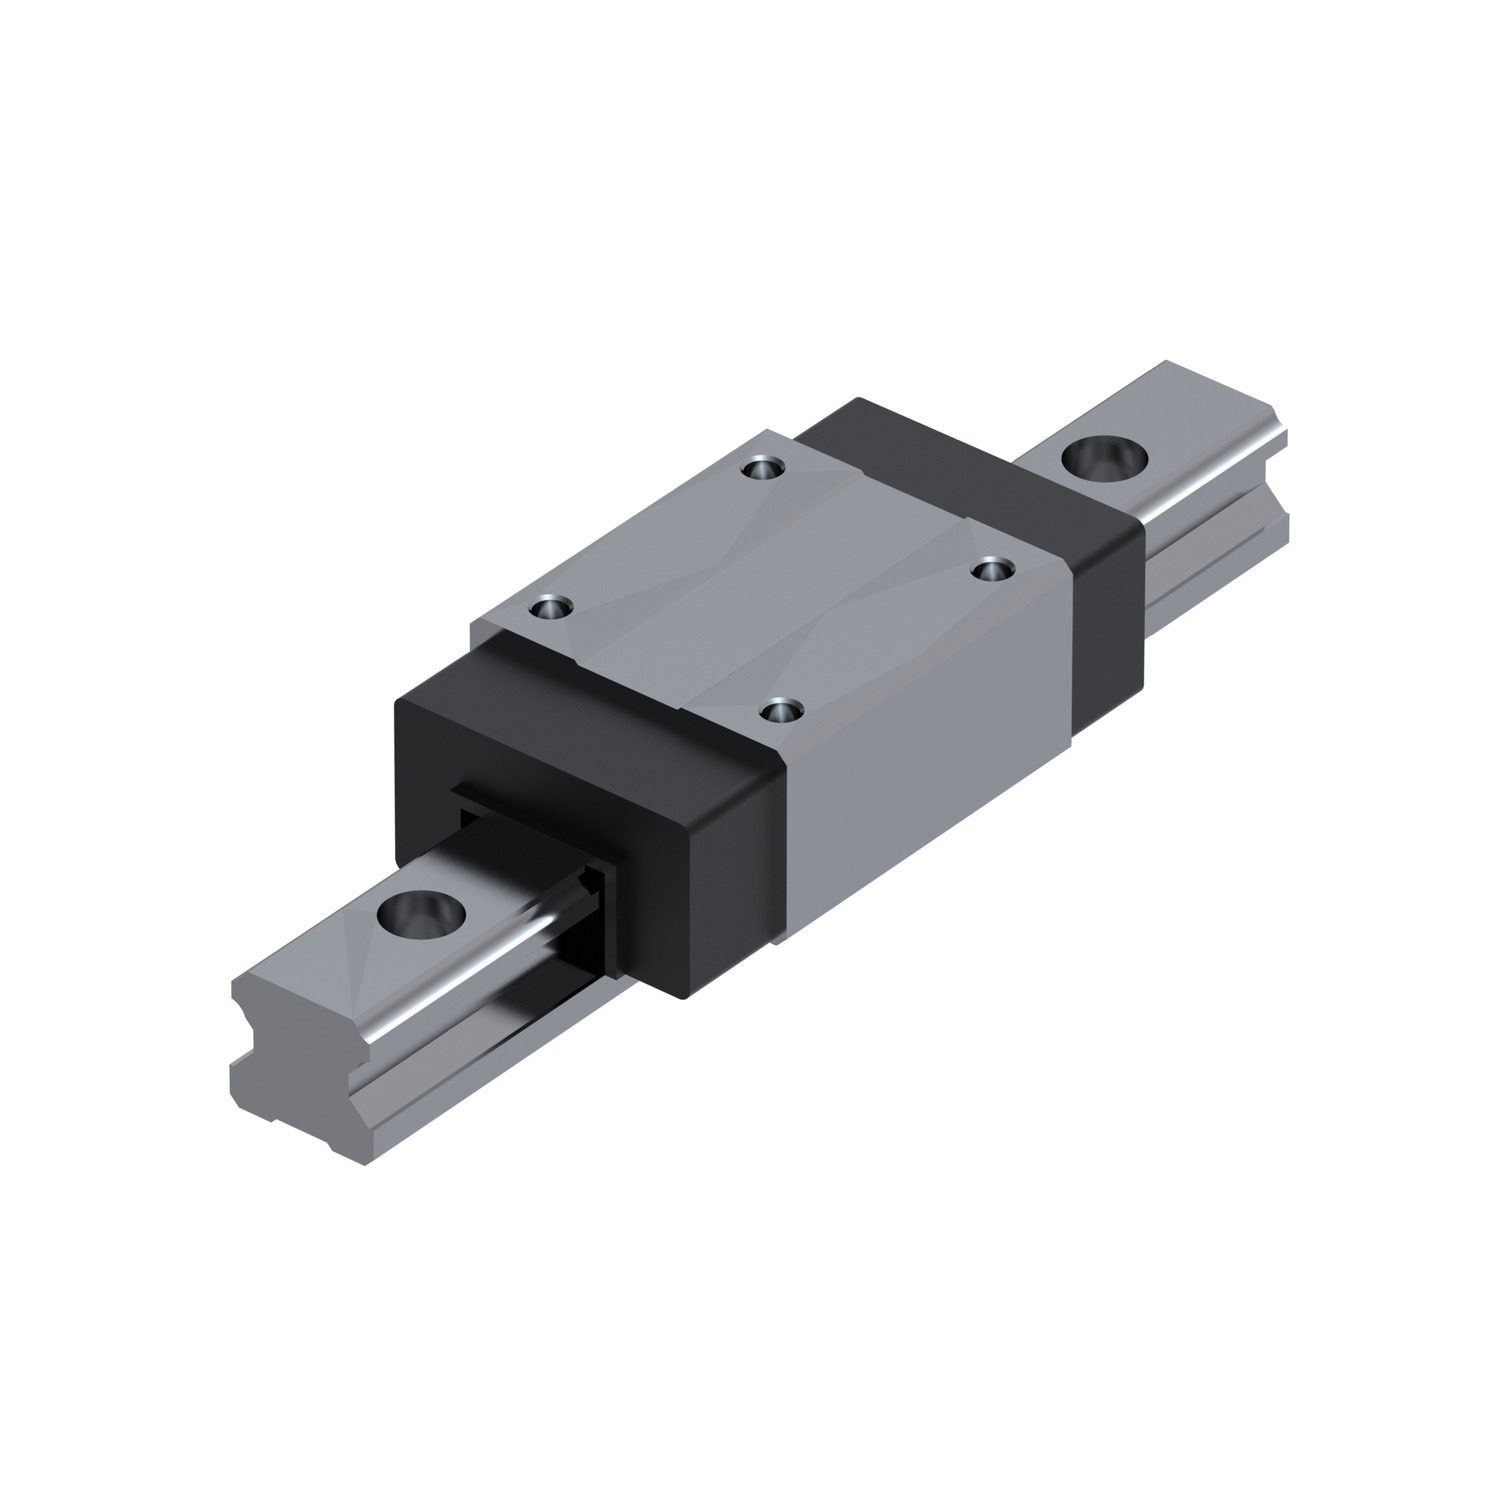 Linear Guideways Linear motion systems with accessories from Automotion Components. See our linear guideways page.